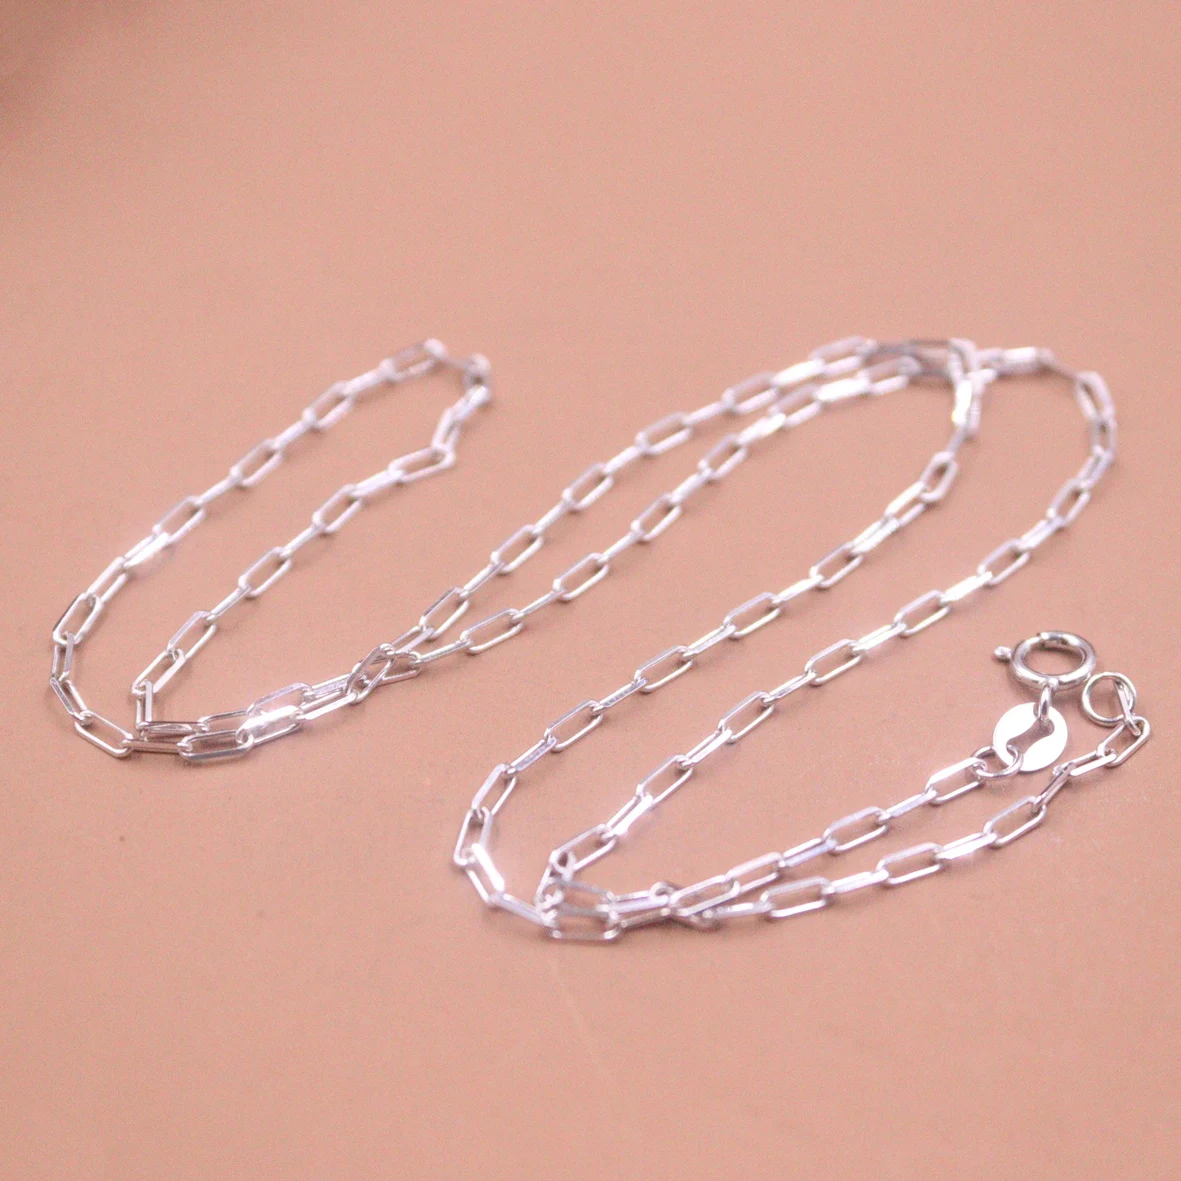 

Real Pure 18K White Gold Necklace Women 2mm Width Solid Cable Link Chain 18inch Length Stamp Au750 With Spring Clasp